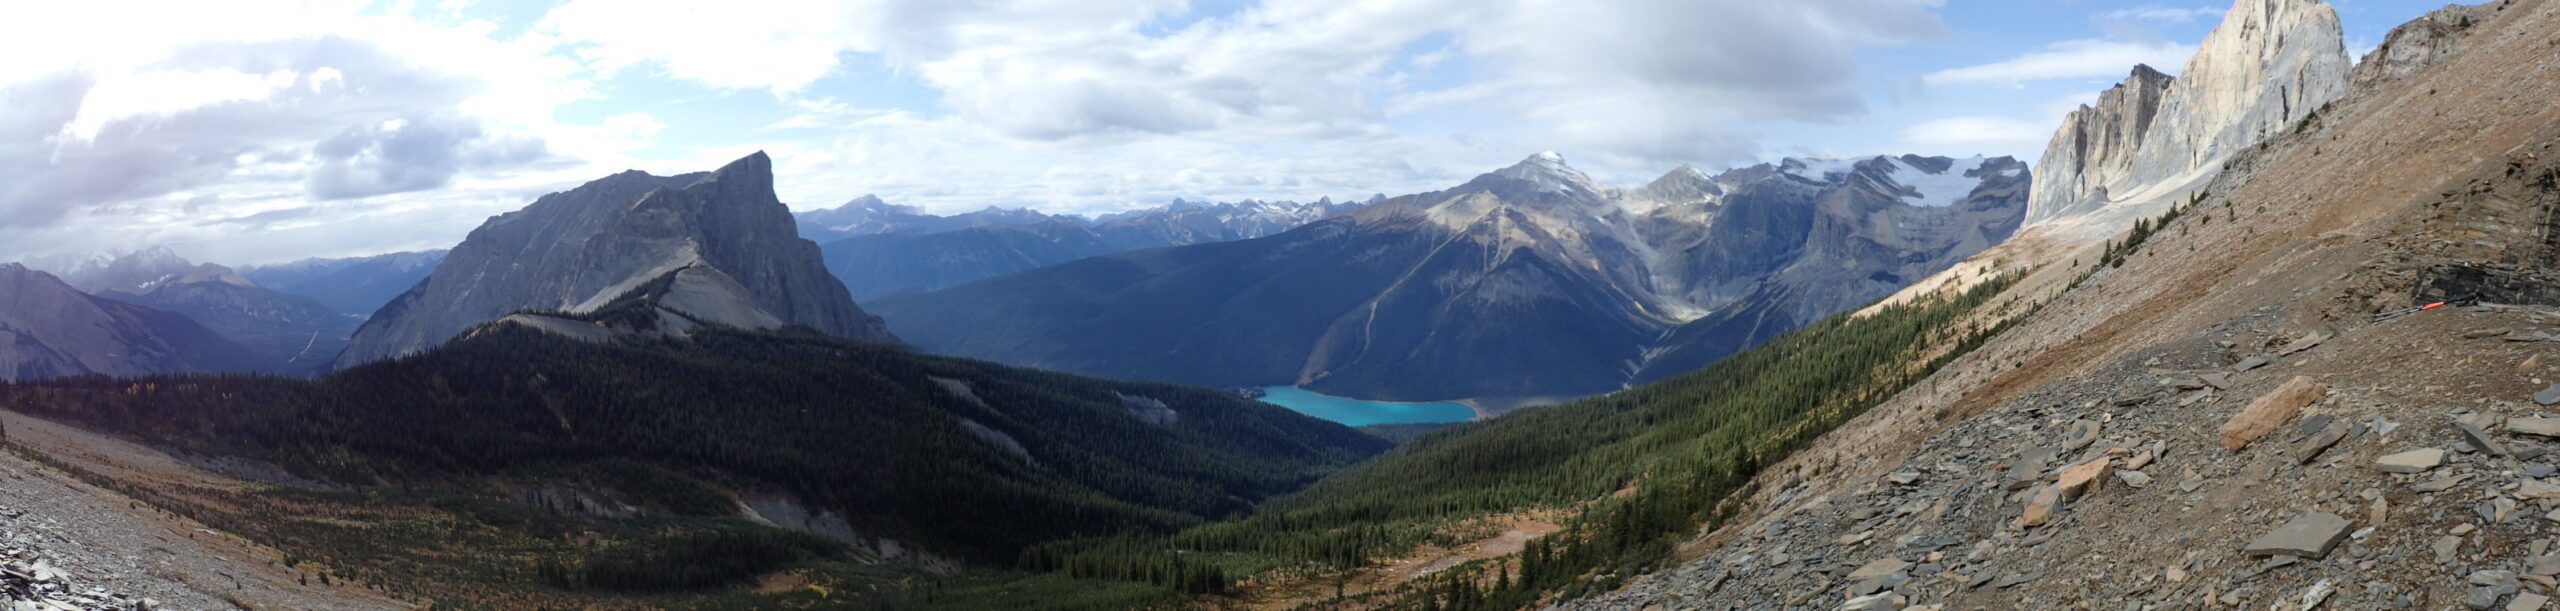 View of the mountains and lakes from Walcott's quarry at the Burgess Shale.